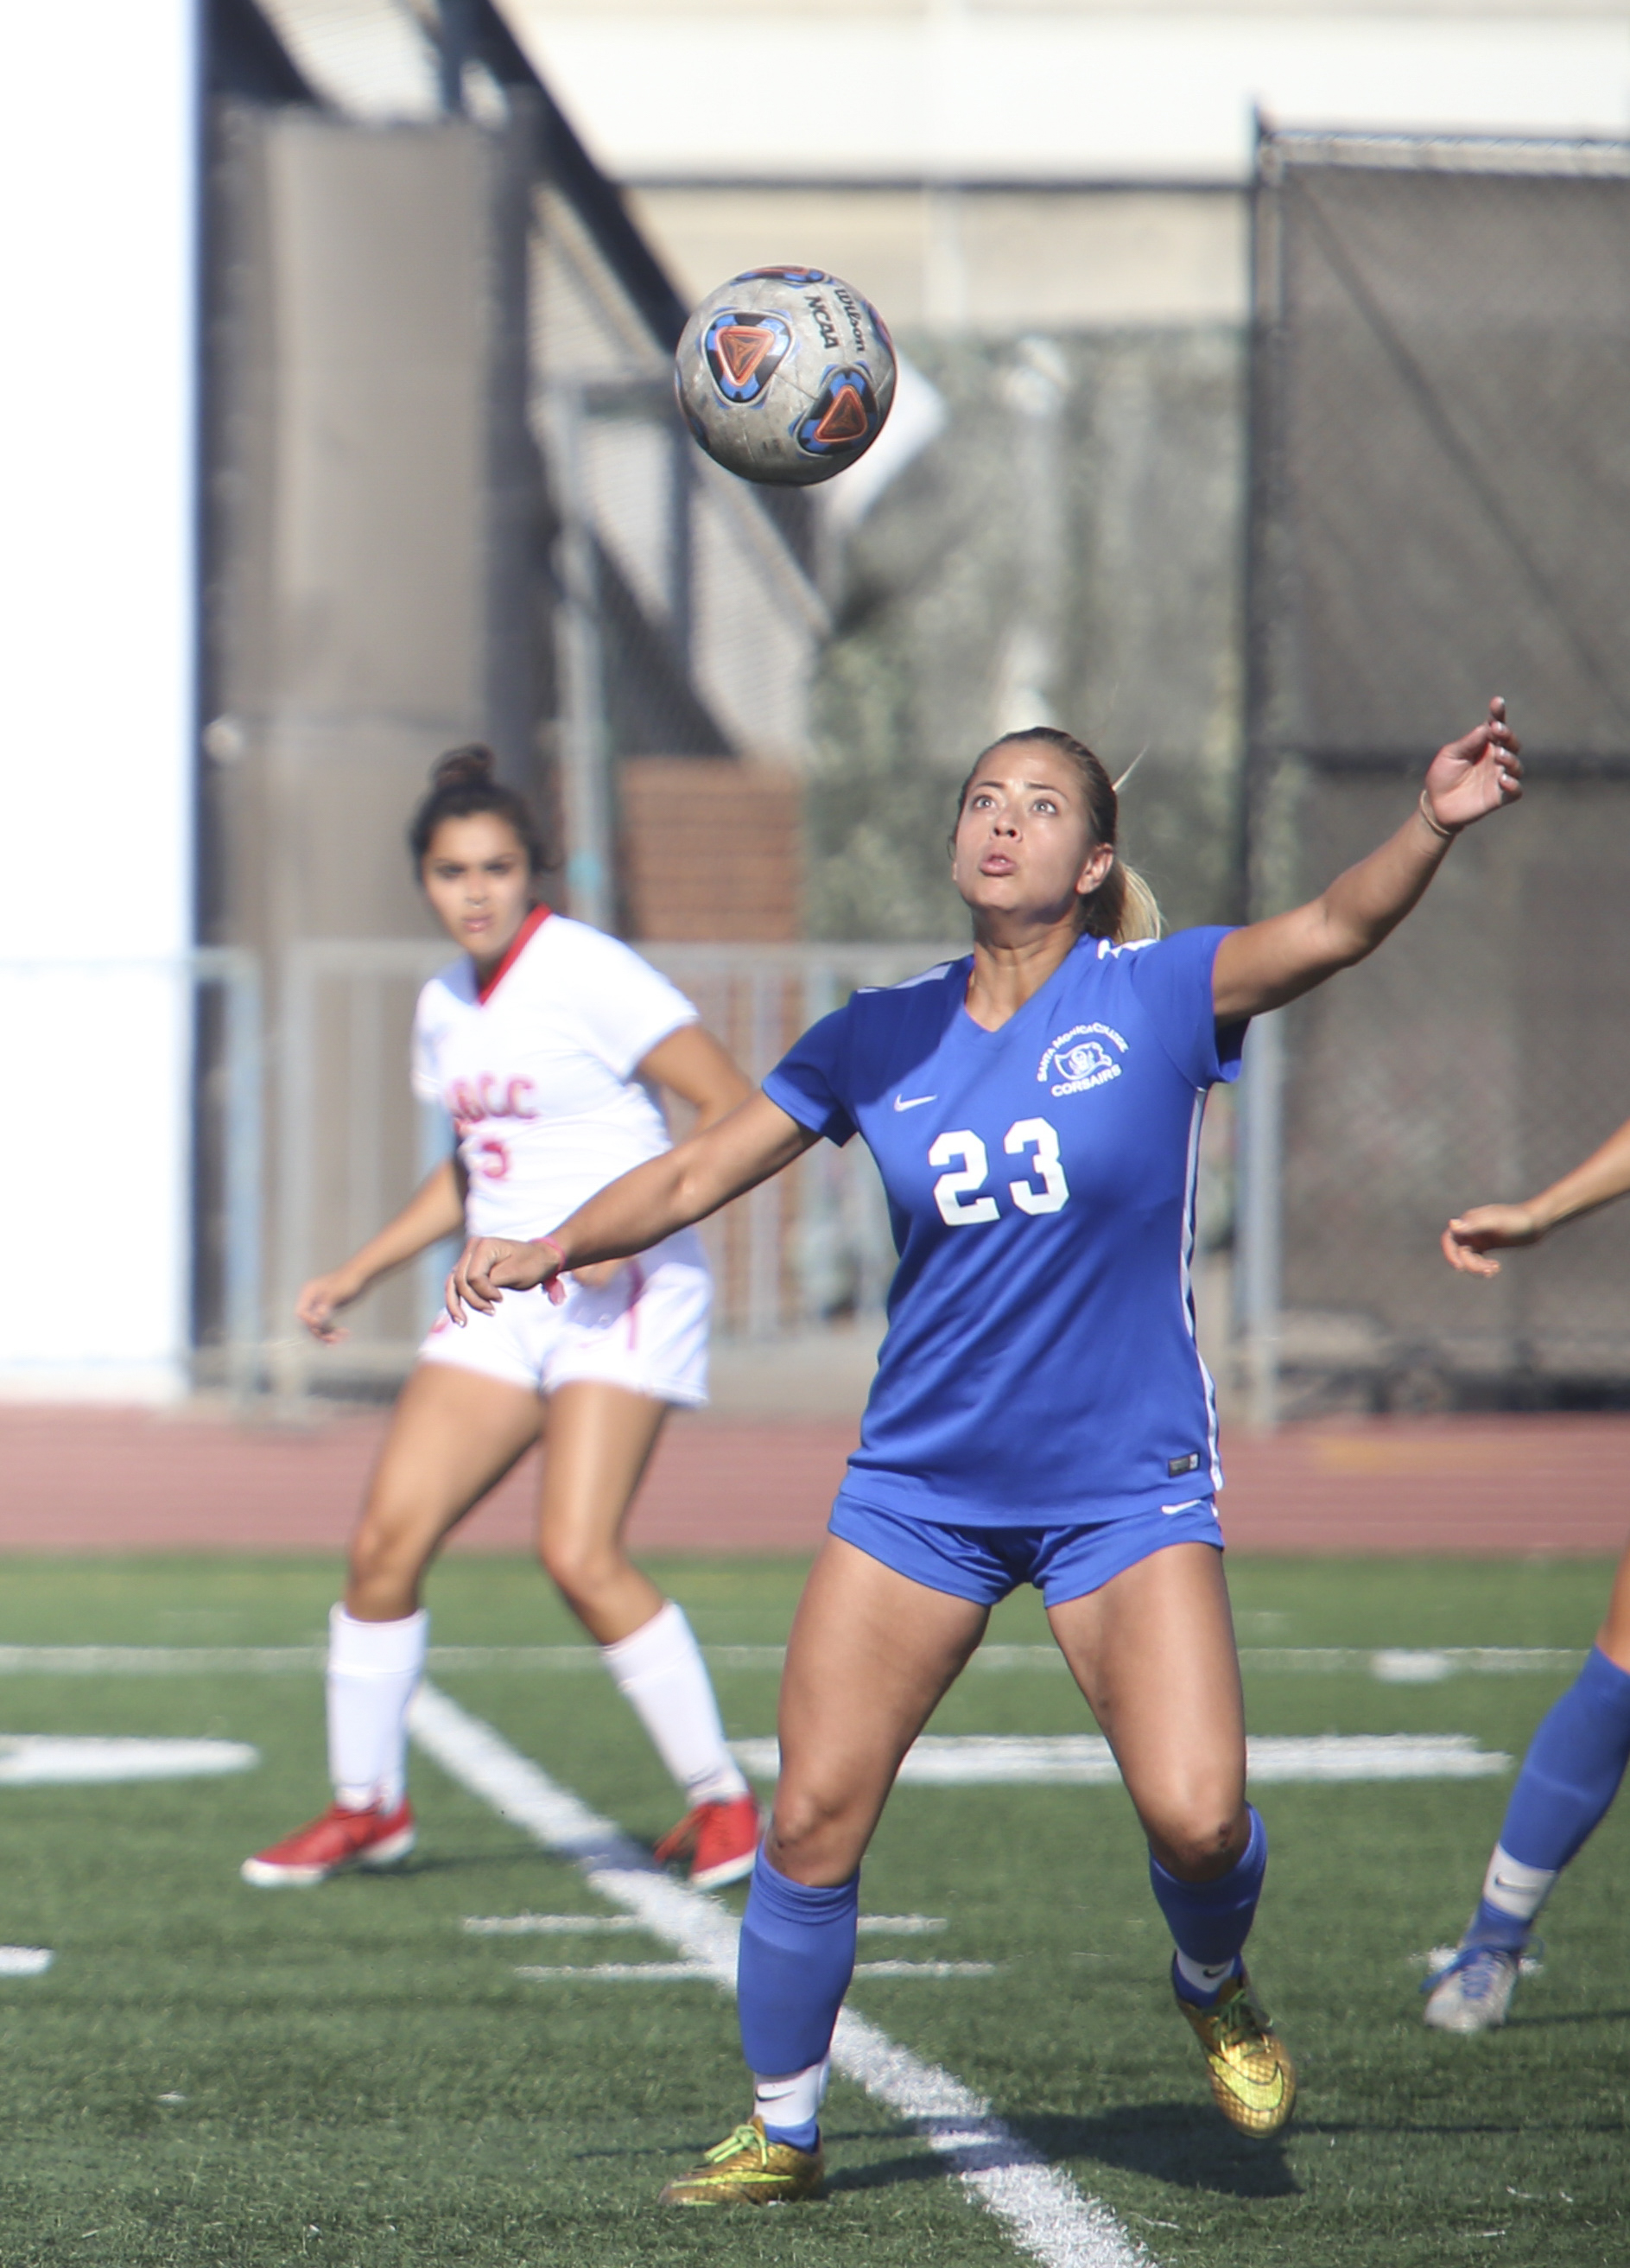  Daysi Serrano (23) prepares to headbutt the ball during the soccer game between the Santa Monica College Corsairs and Santa Barbara City College Vaqueros at the Corsair Stadium at Santa Monica College's Main Campus in Santa Monica, Calif on Tuesday,